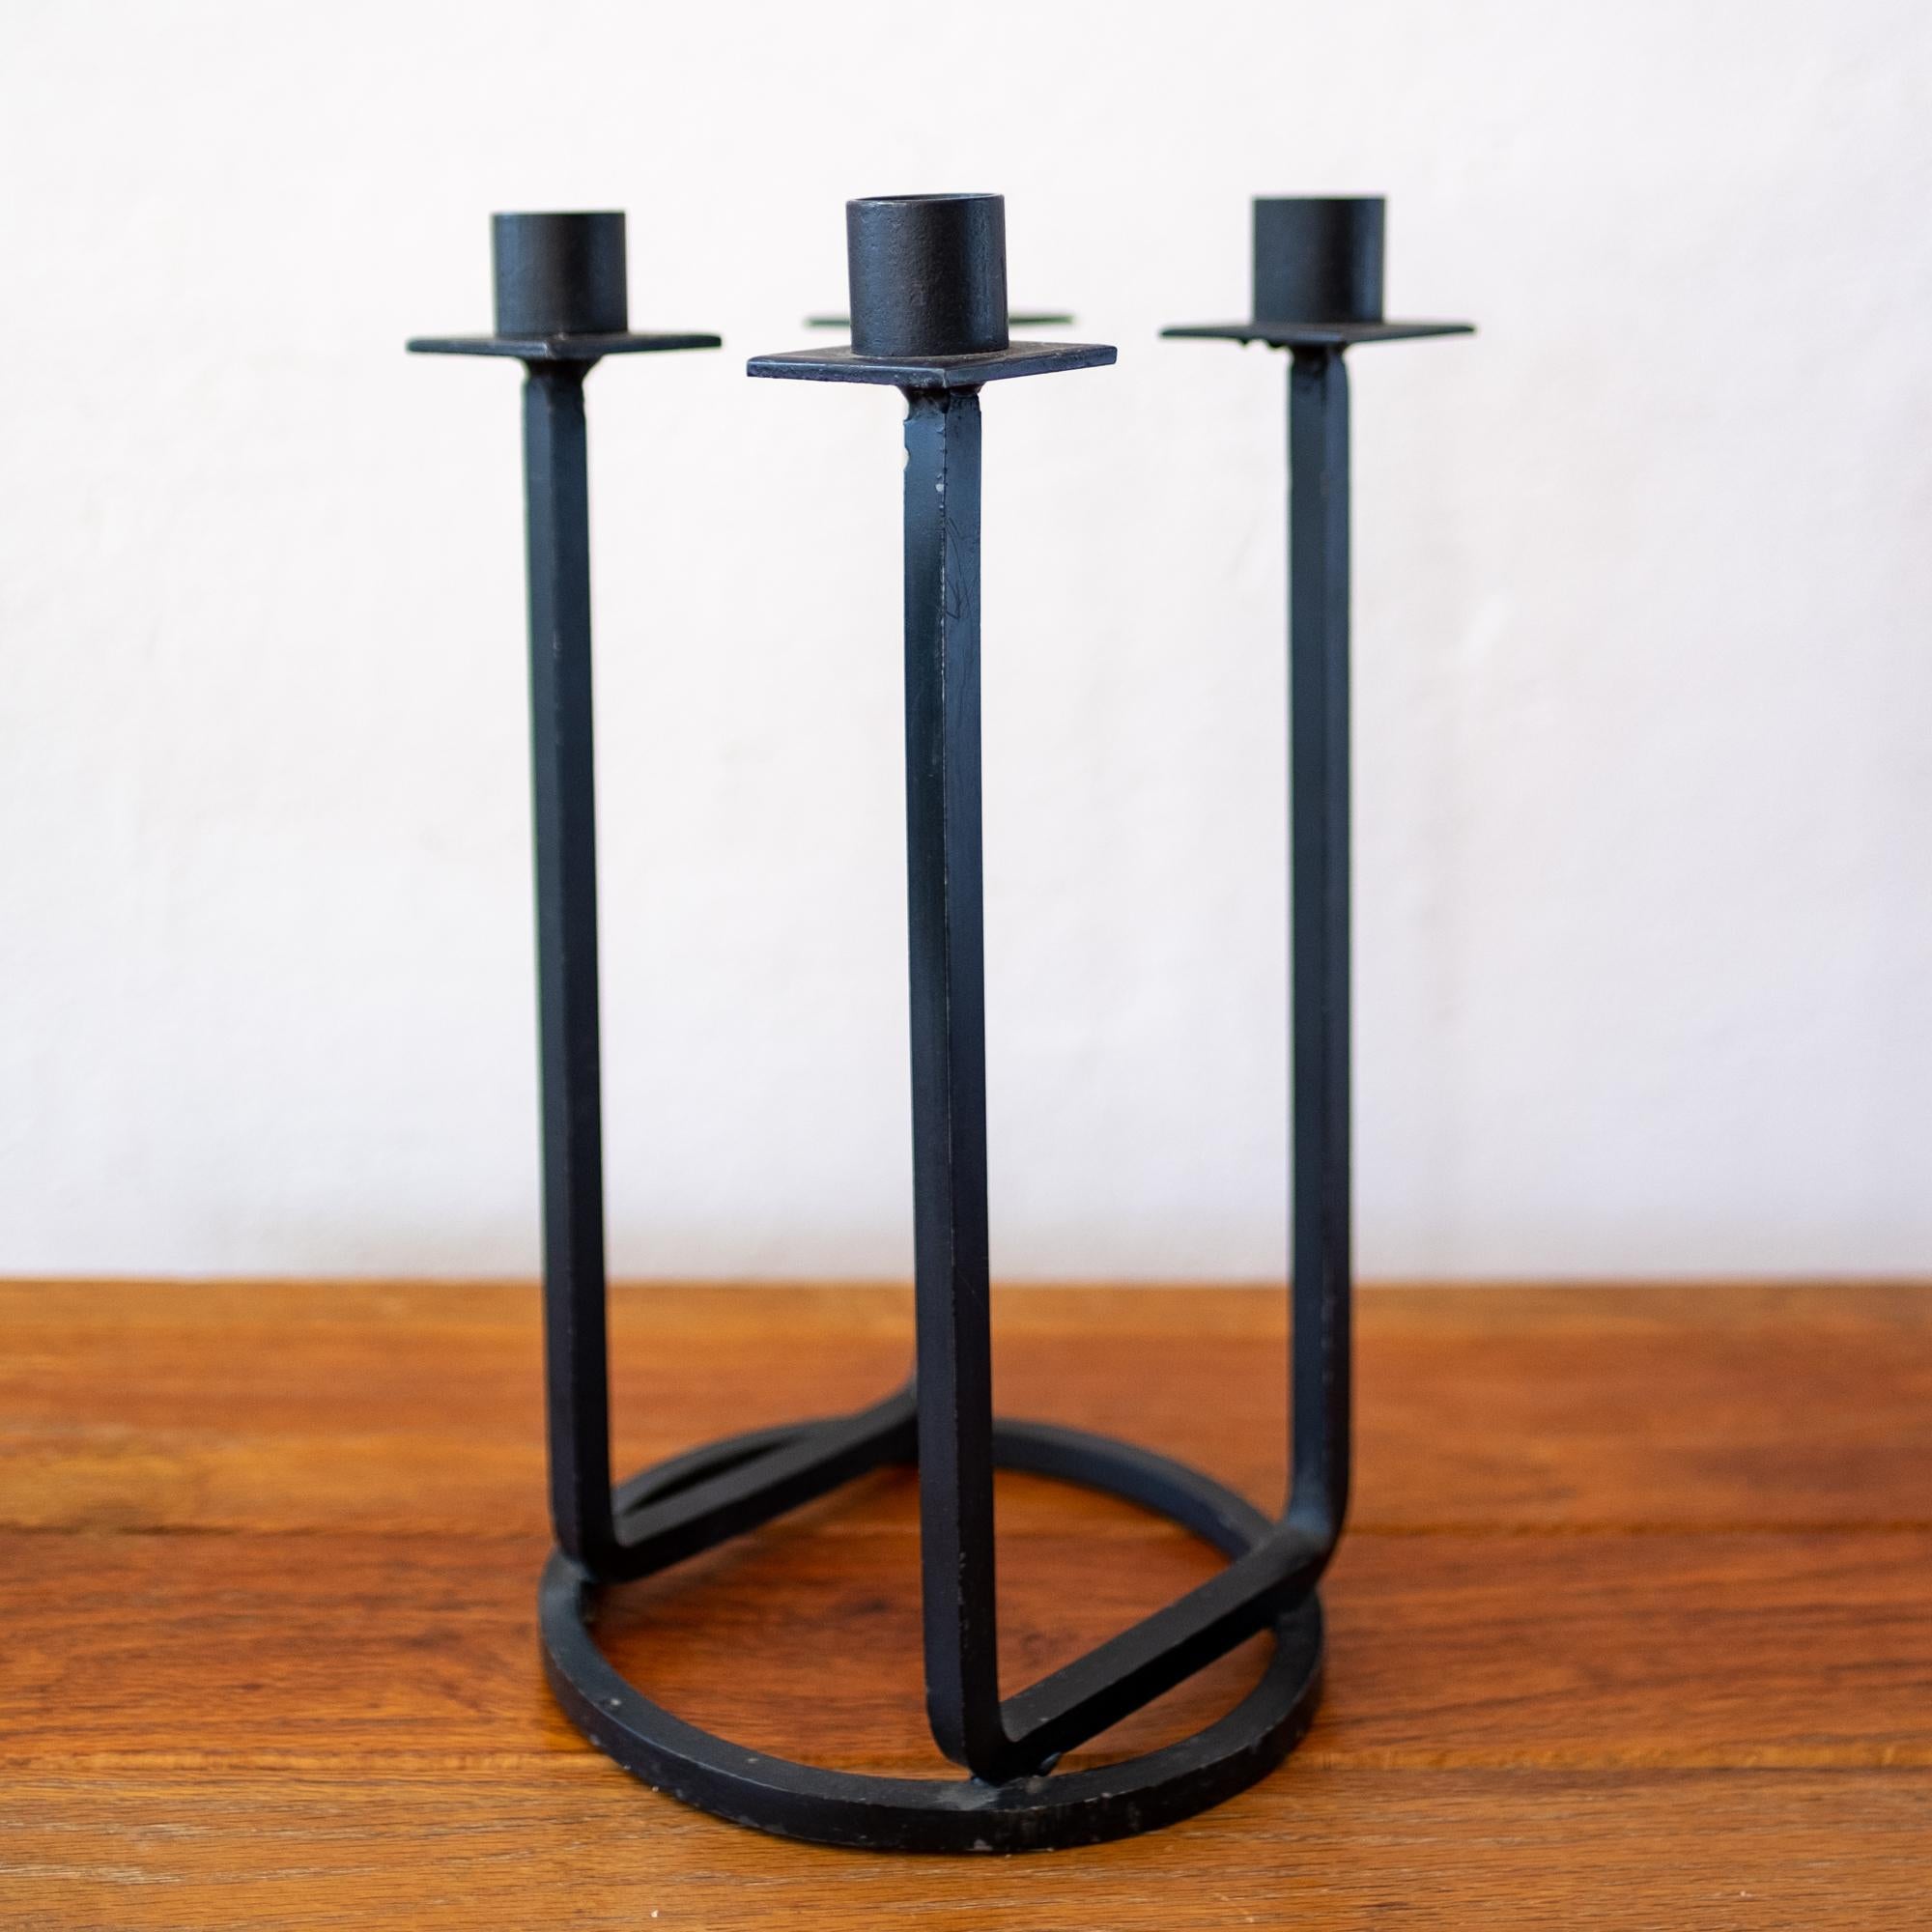 Pair of Van Keppel Green iron candleholders for their company VKG (Van Keppel-Green) of Beverly Hills. A rare matched pair from the 1950s.

Partners Hendrick Van Keppel and Taylor Green (VKG) designed custom furniture for their boutique shop which